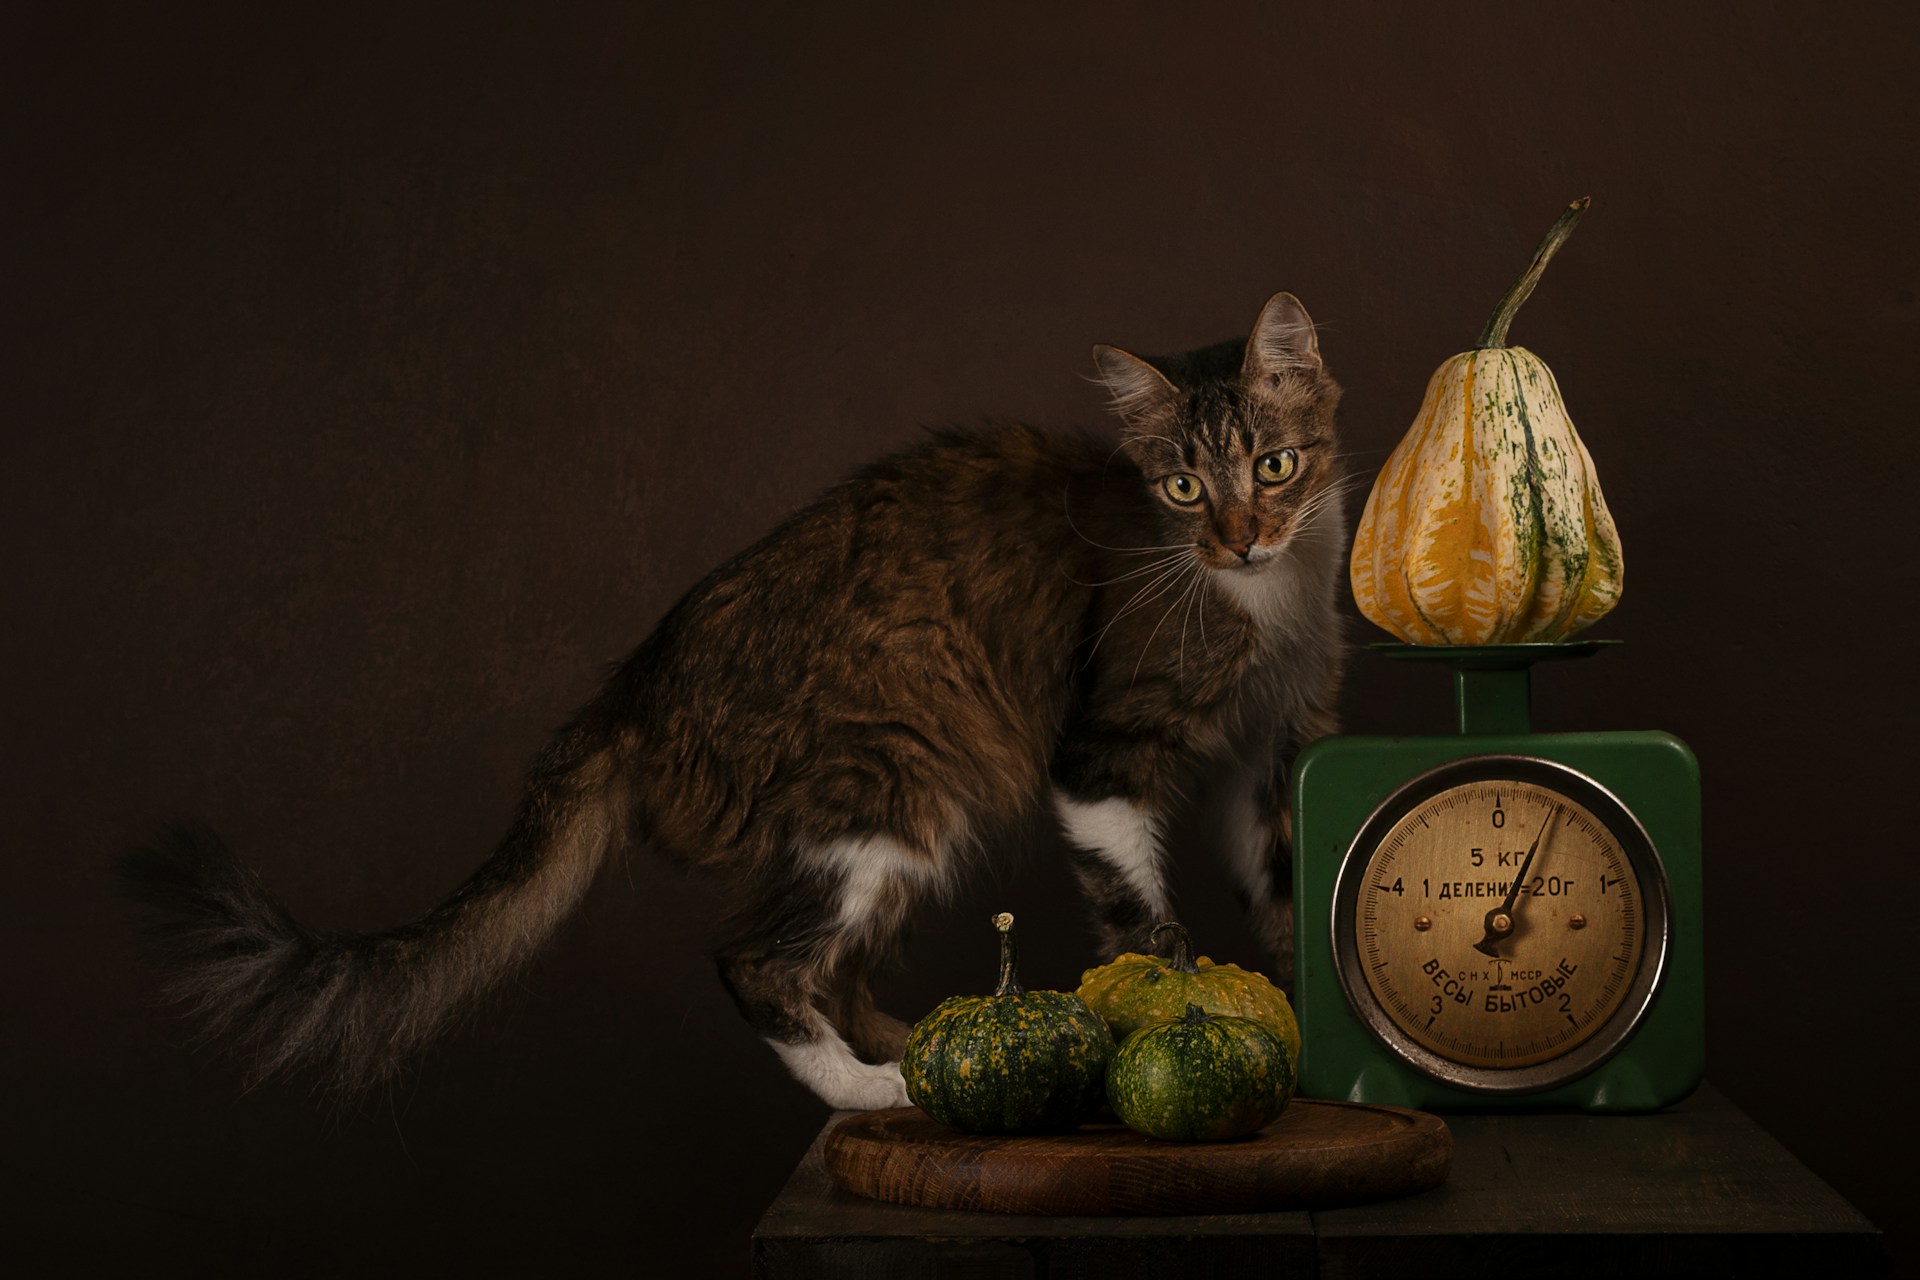 A cat sitting on a table besides pumpkins and a weighing scale